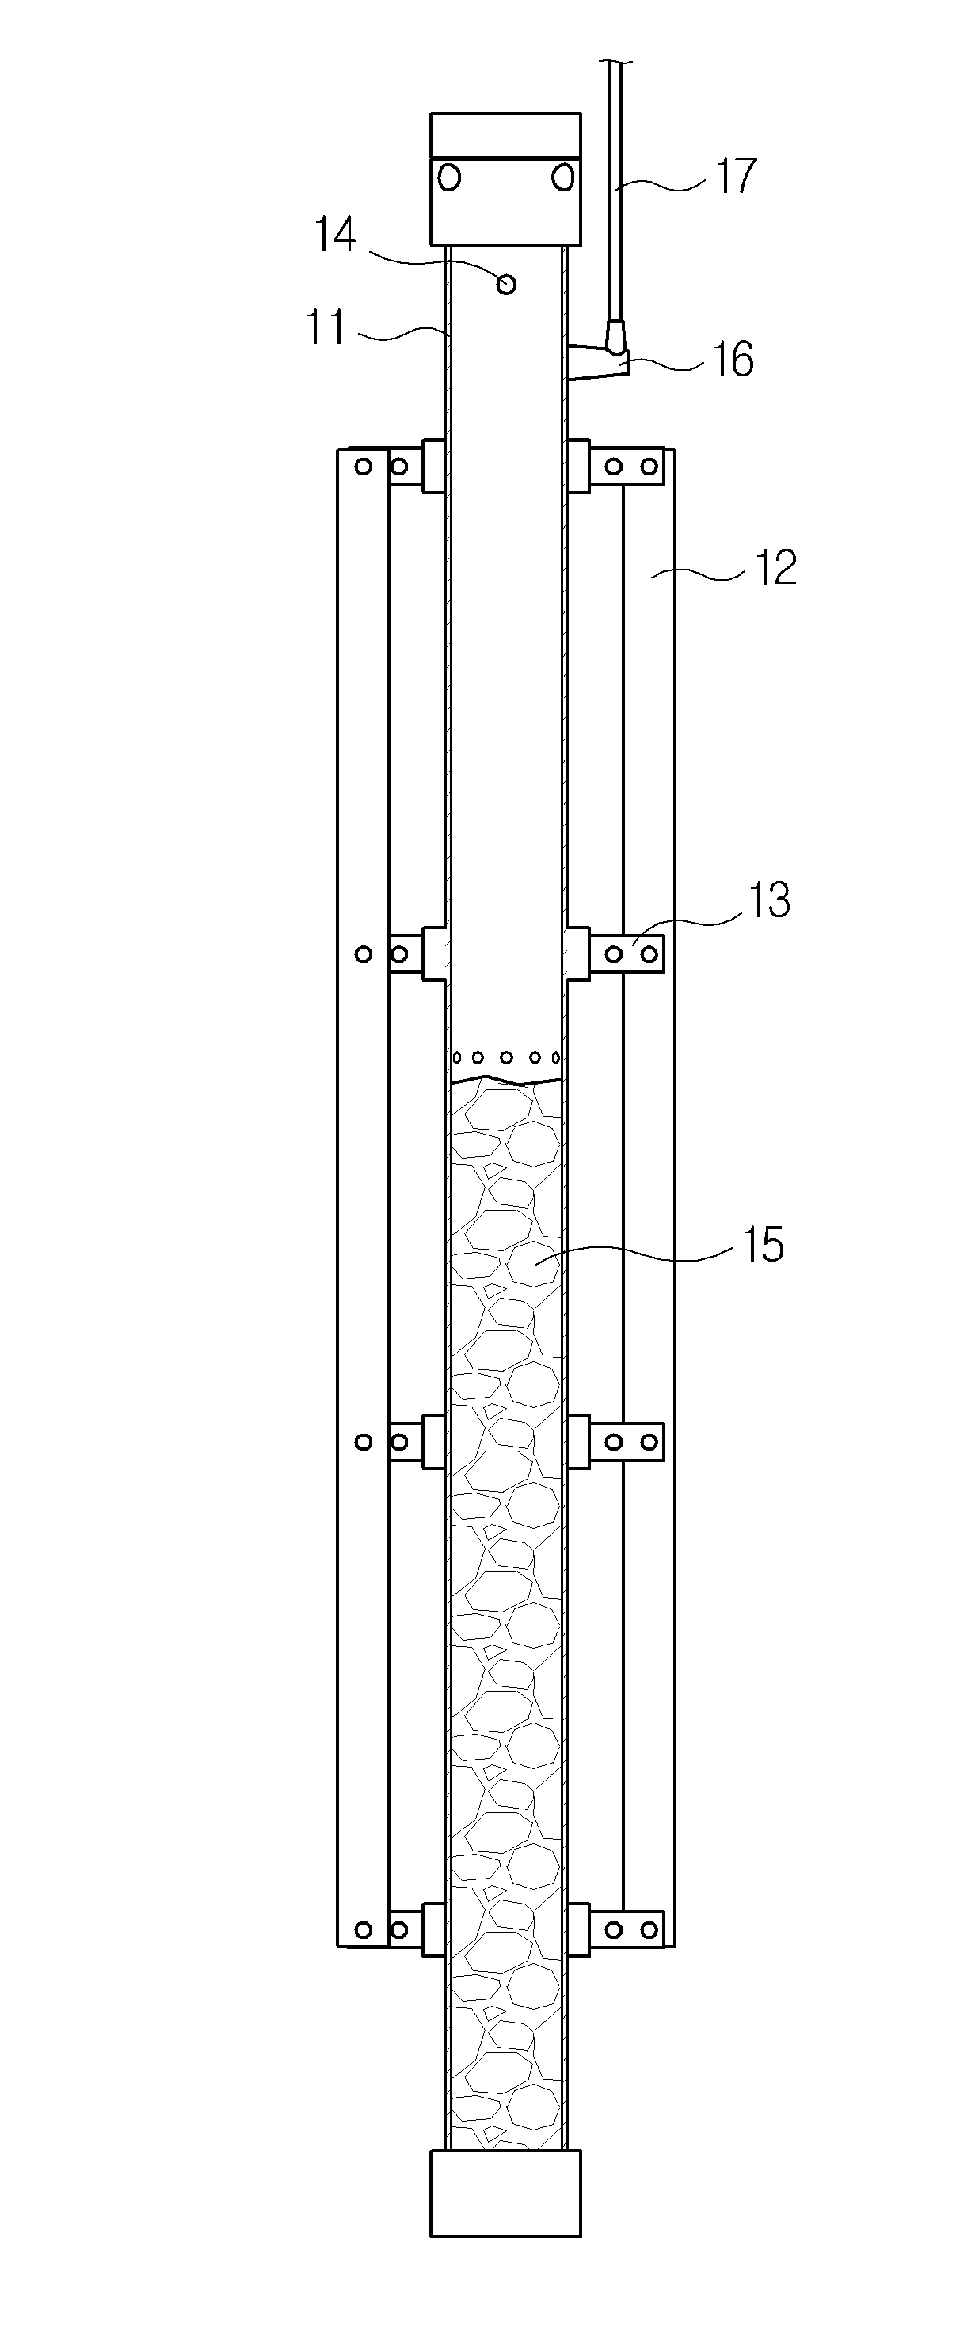 Ground rod having induction discharge skin-effect plate